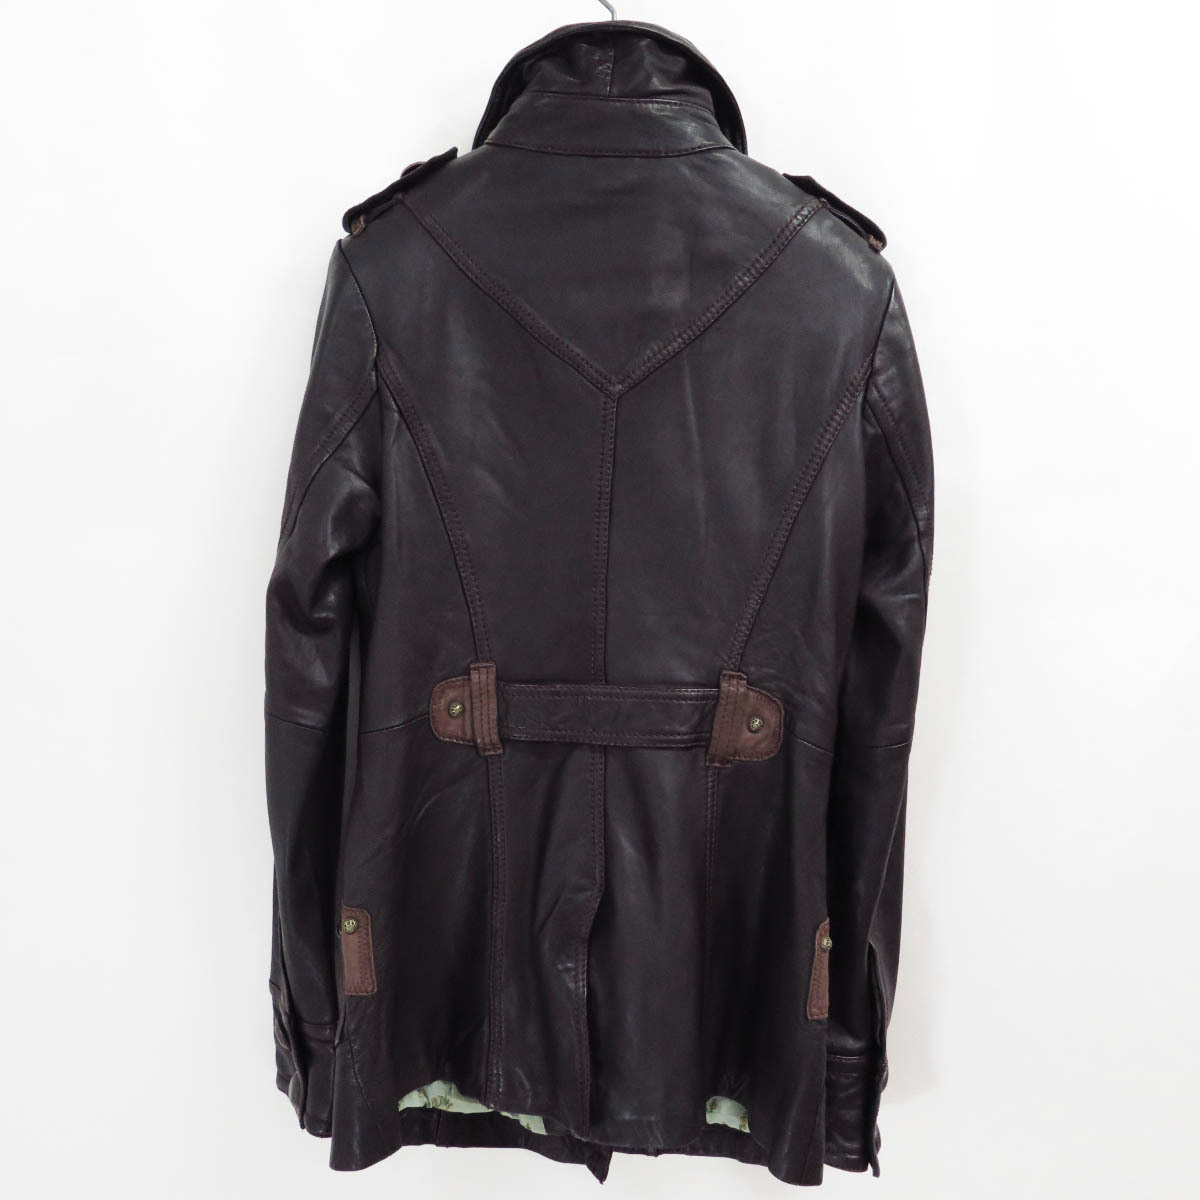 ANNA SUI STITCH WORK WIRE TRIM LEATHER MIDDLE TRENCH COAT Anna Sui stitch wire leather middle trench coat jacket 